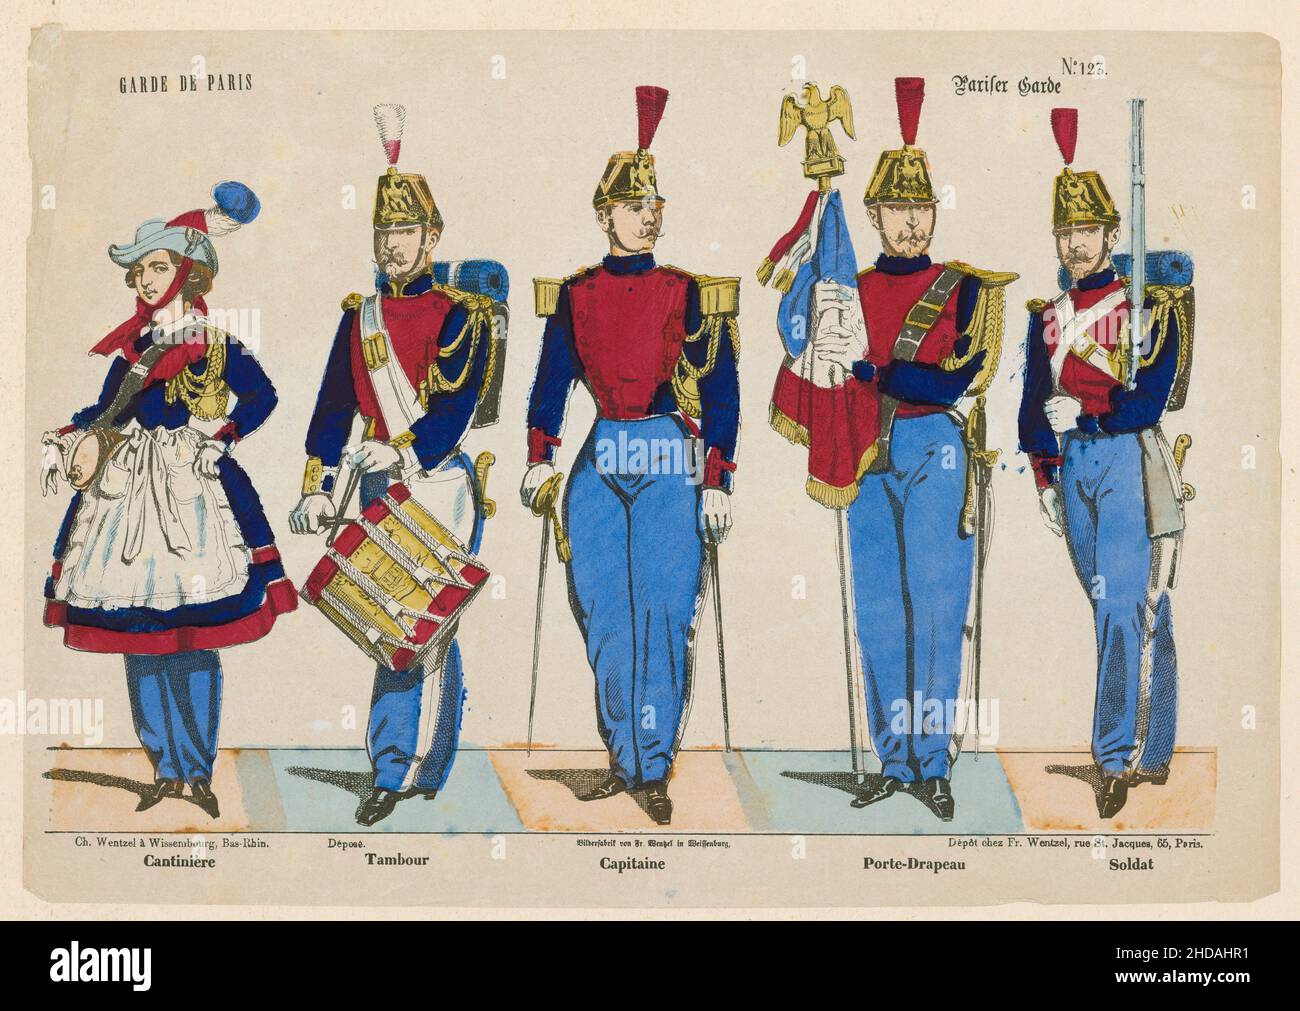 Vintage lithography of Paris Guard. 1870 Cantiniere, Drum, Captain, Flag Bearer, Soldier Stock Photo